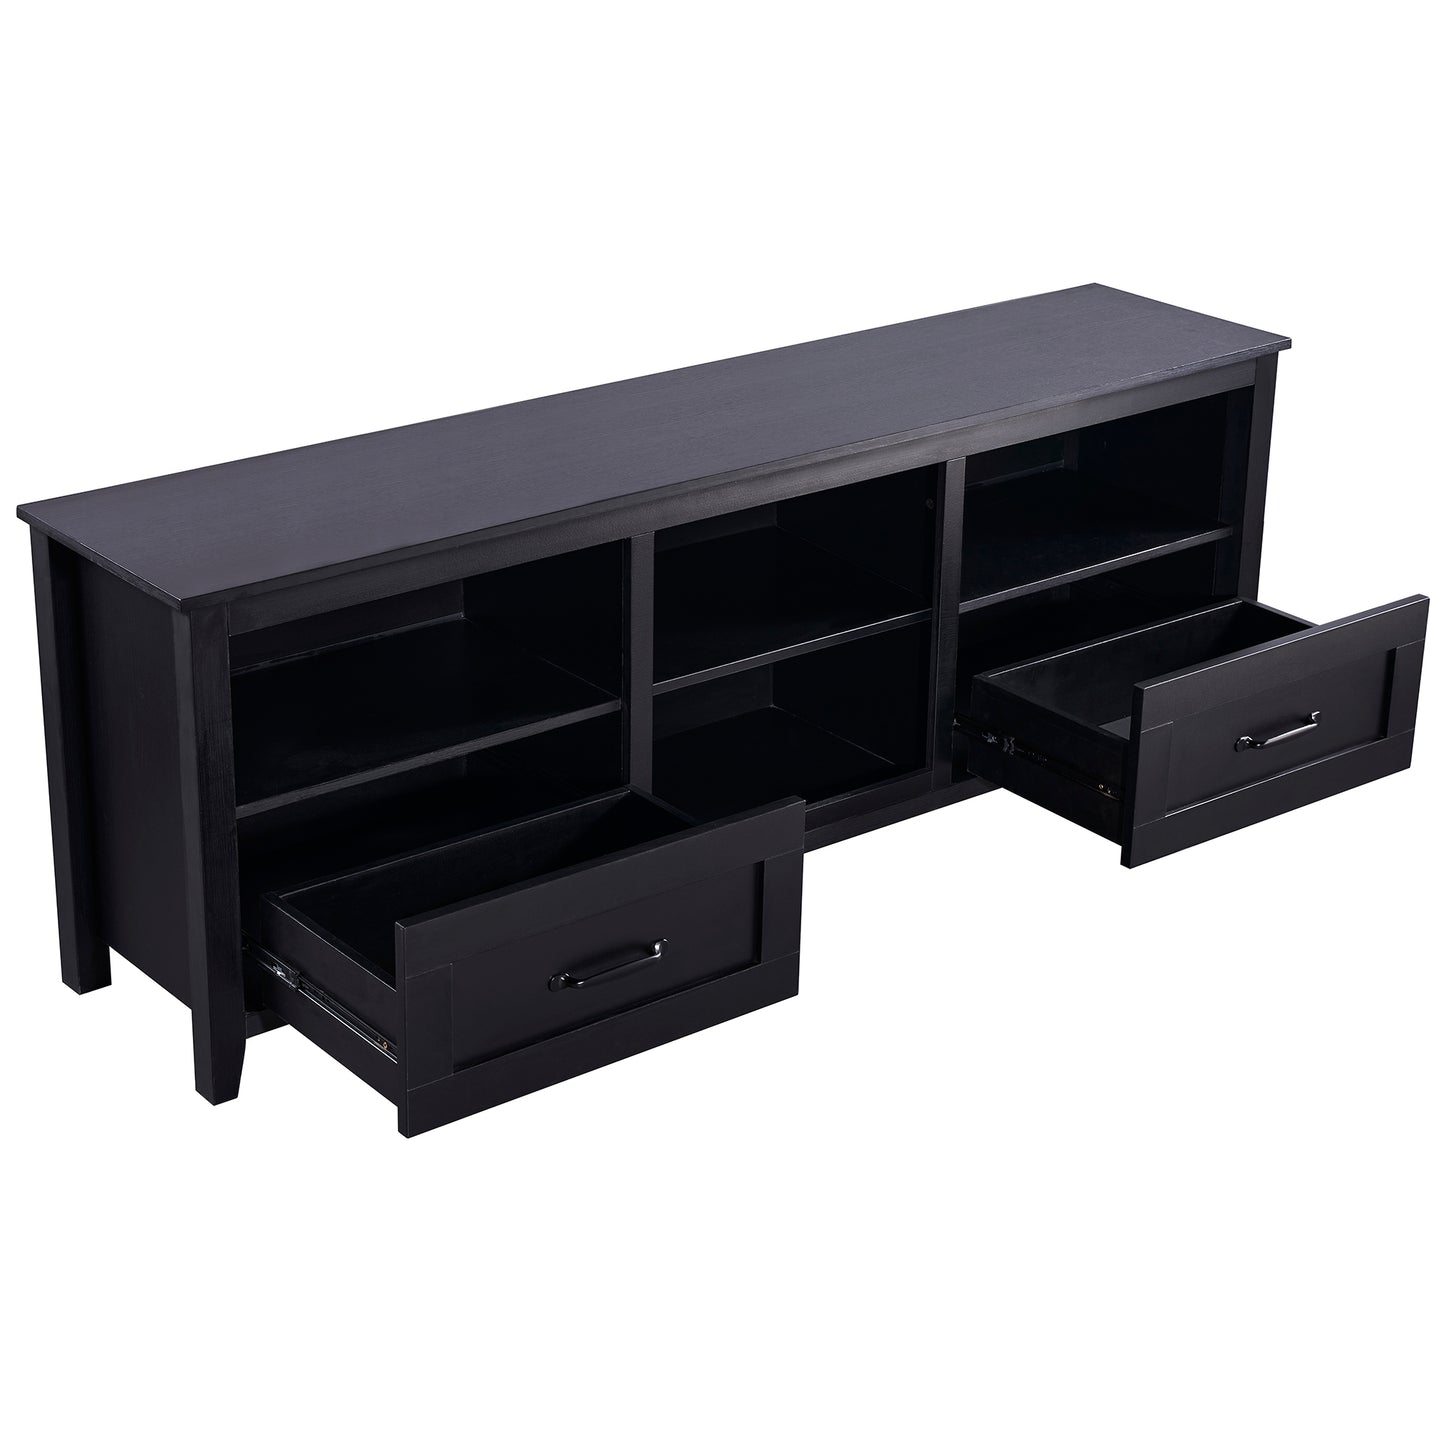 SYNGAR Farmhouse TV Stand for 70 inch TV, Wooden TV Cabinet Console Table with 2 Drawers and 4 Storage Compartments, Entertainment Center for Living Room, Traditional Black, 70"L x 15"W x 25"H